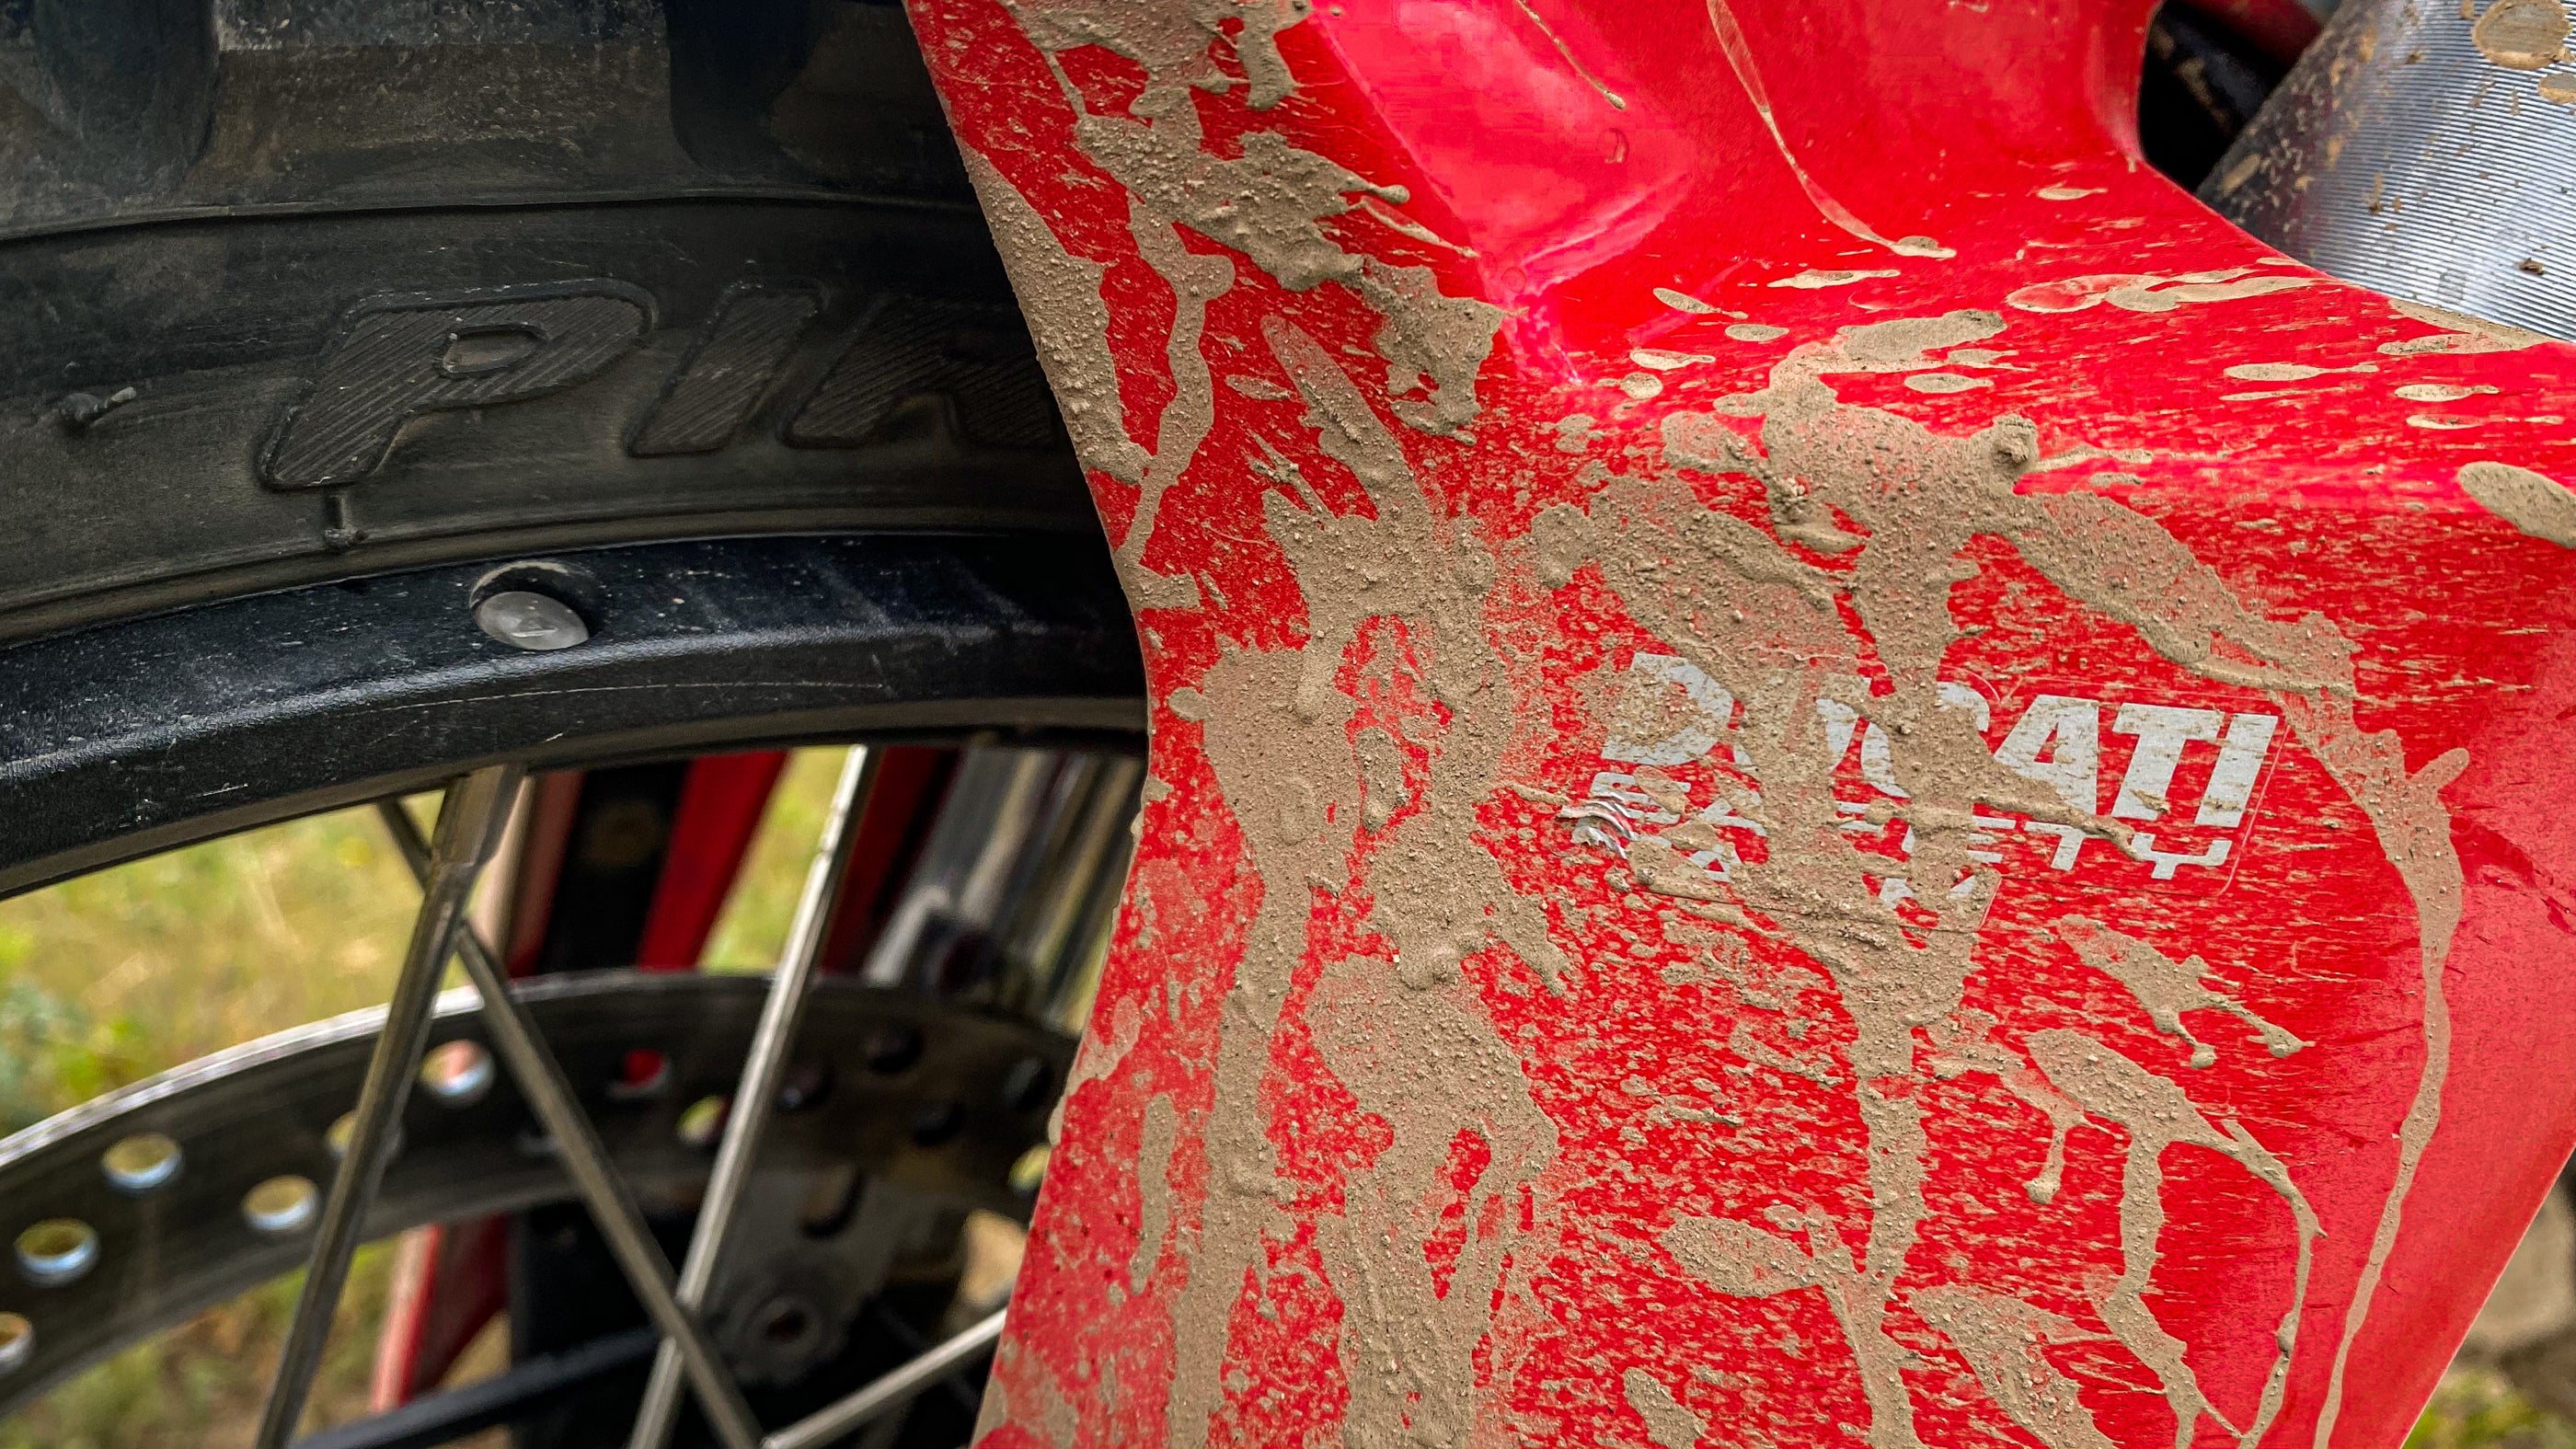 The muddy front fairing of the Ducati.